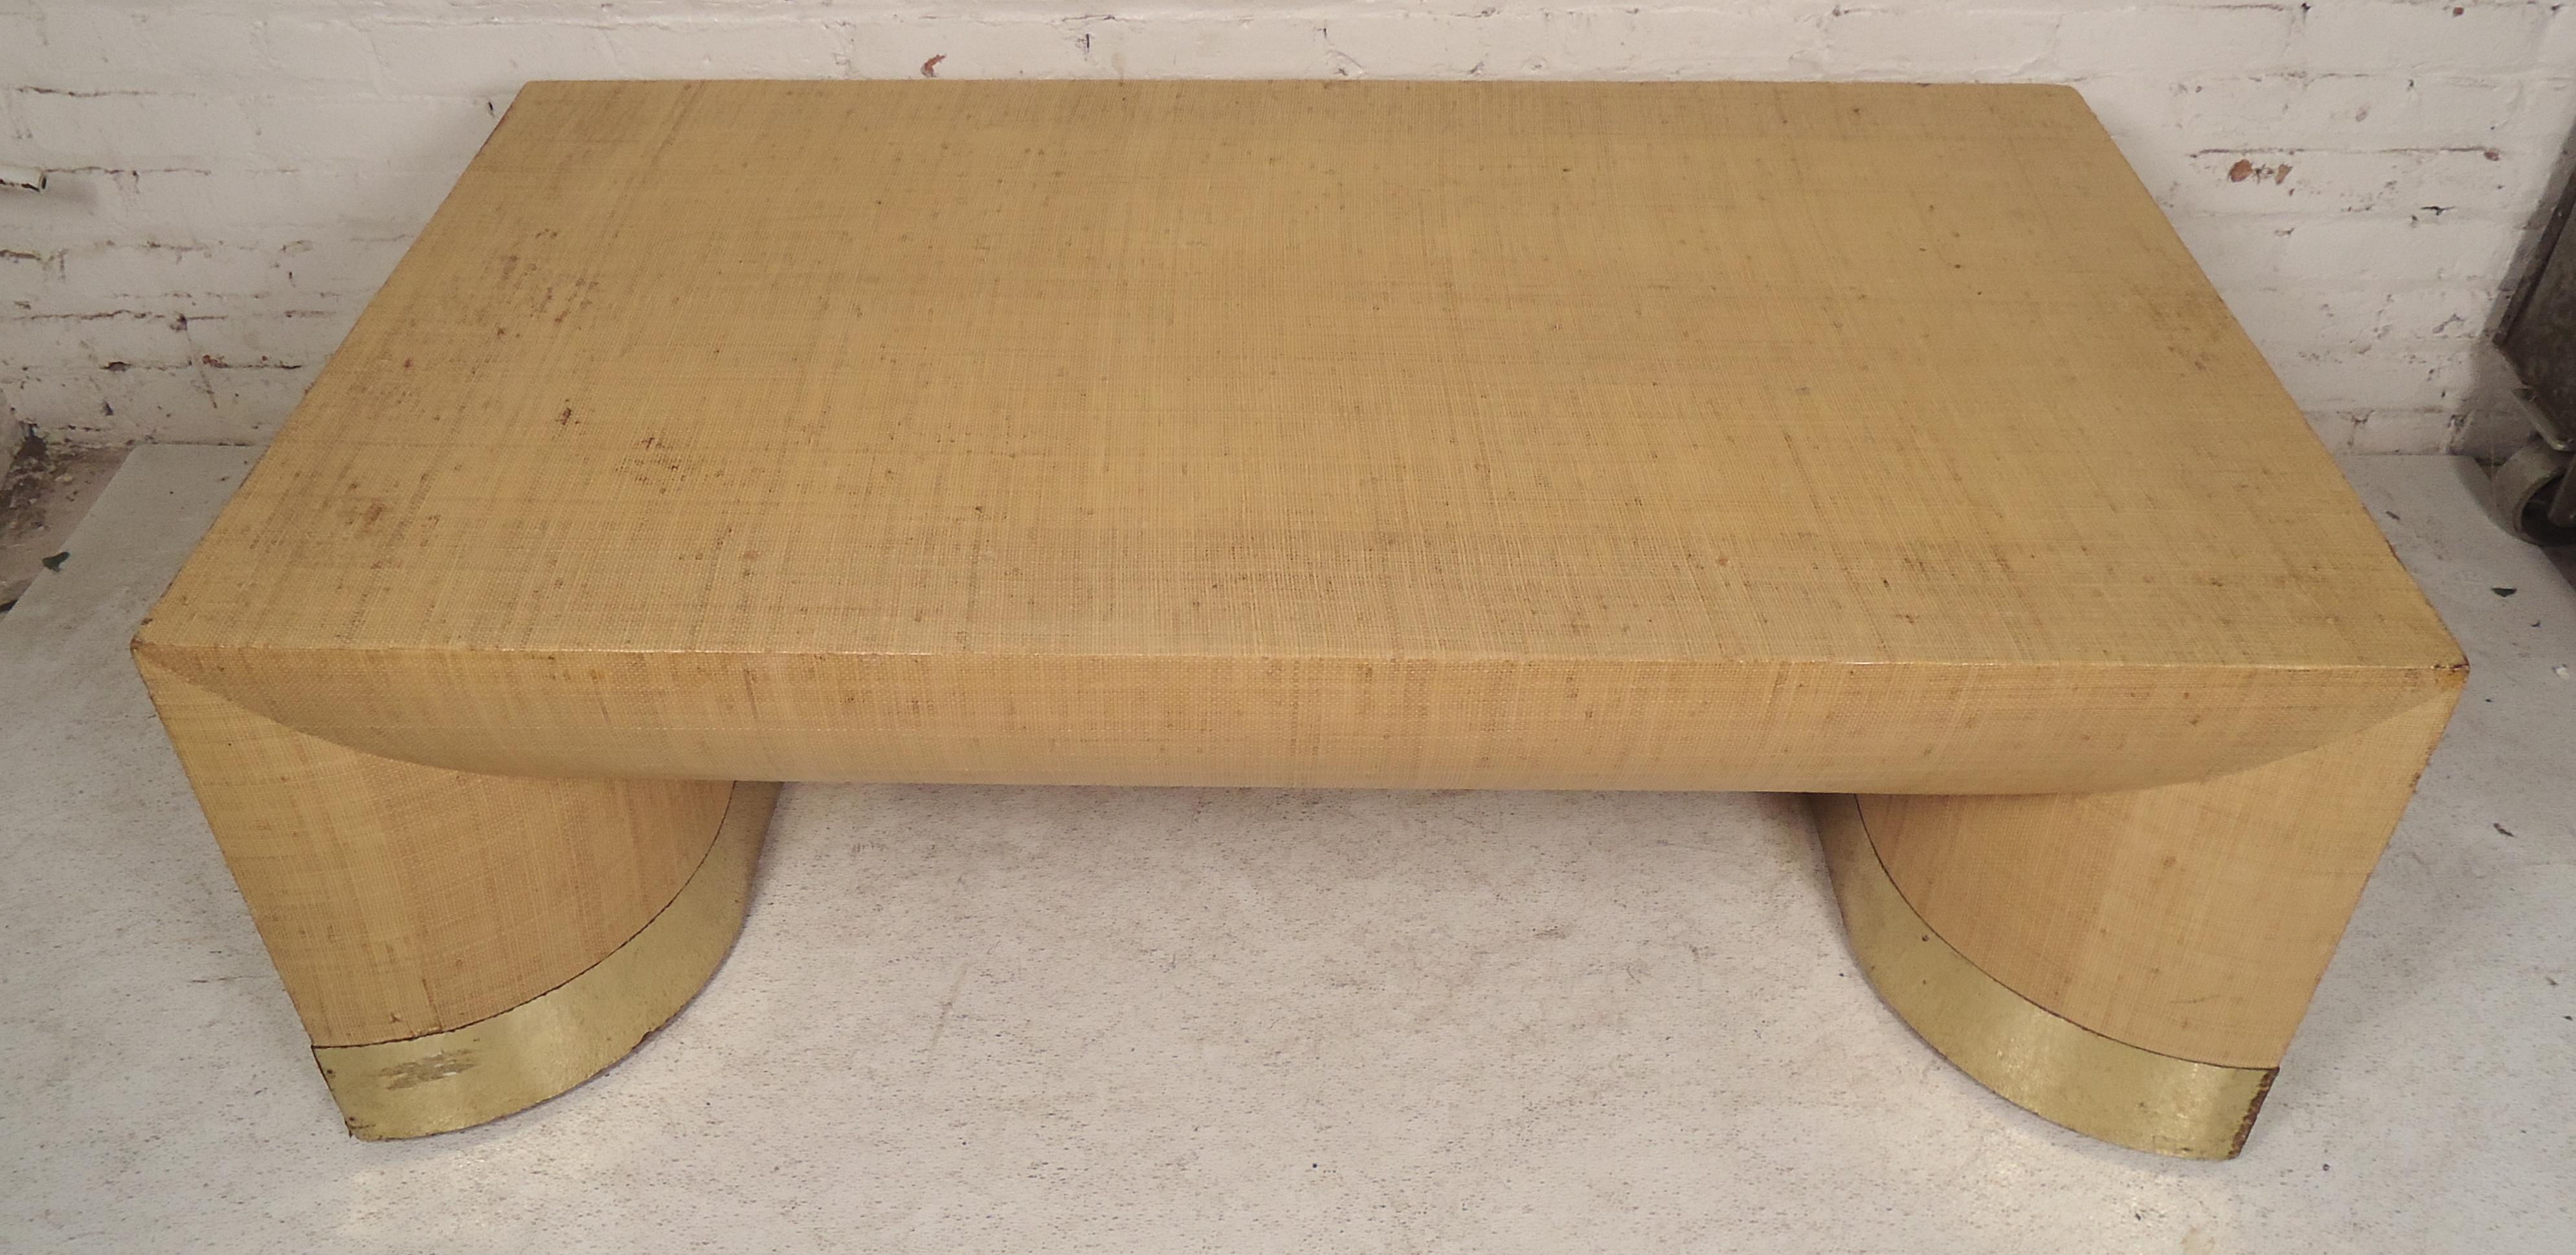 Table with beige color cloth and brass trim base. Table has been lacquered to prevent further fraying.

(Please confirm item location - NY or NJ - with dealer).
 